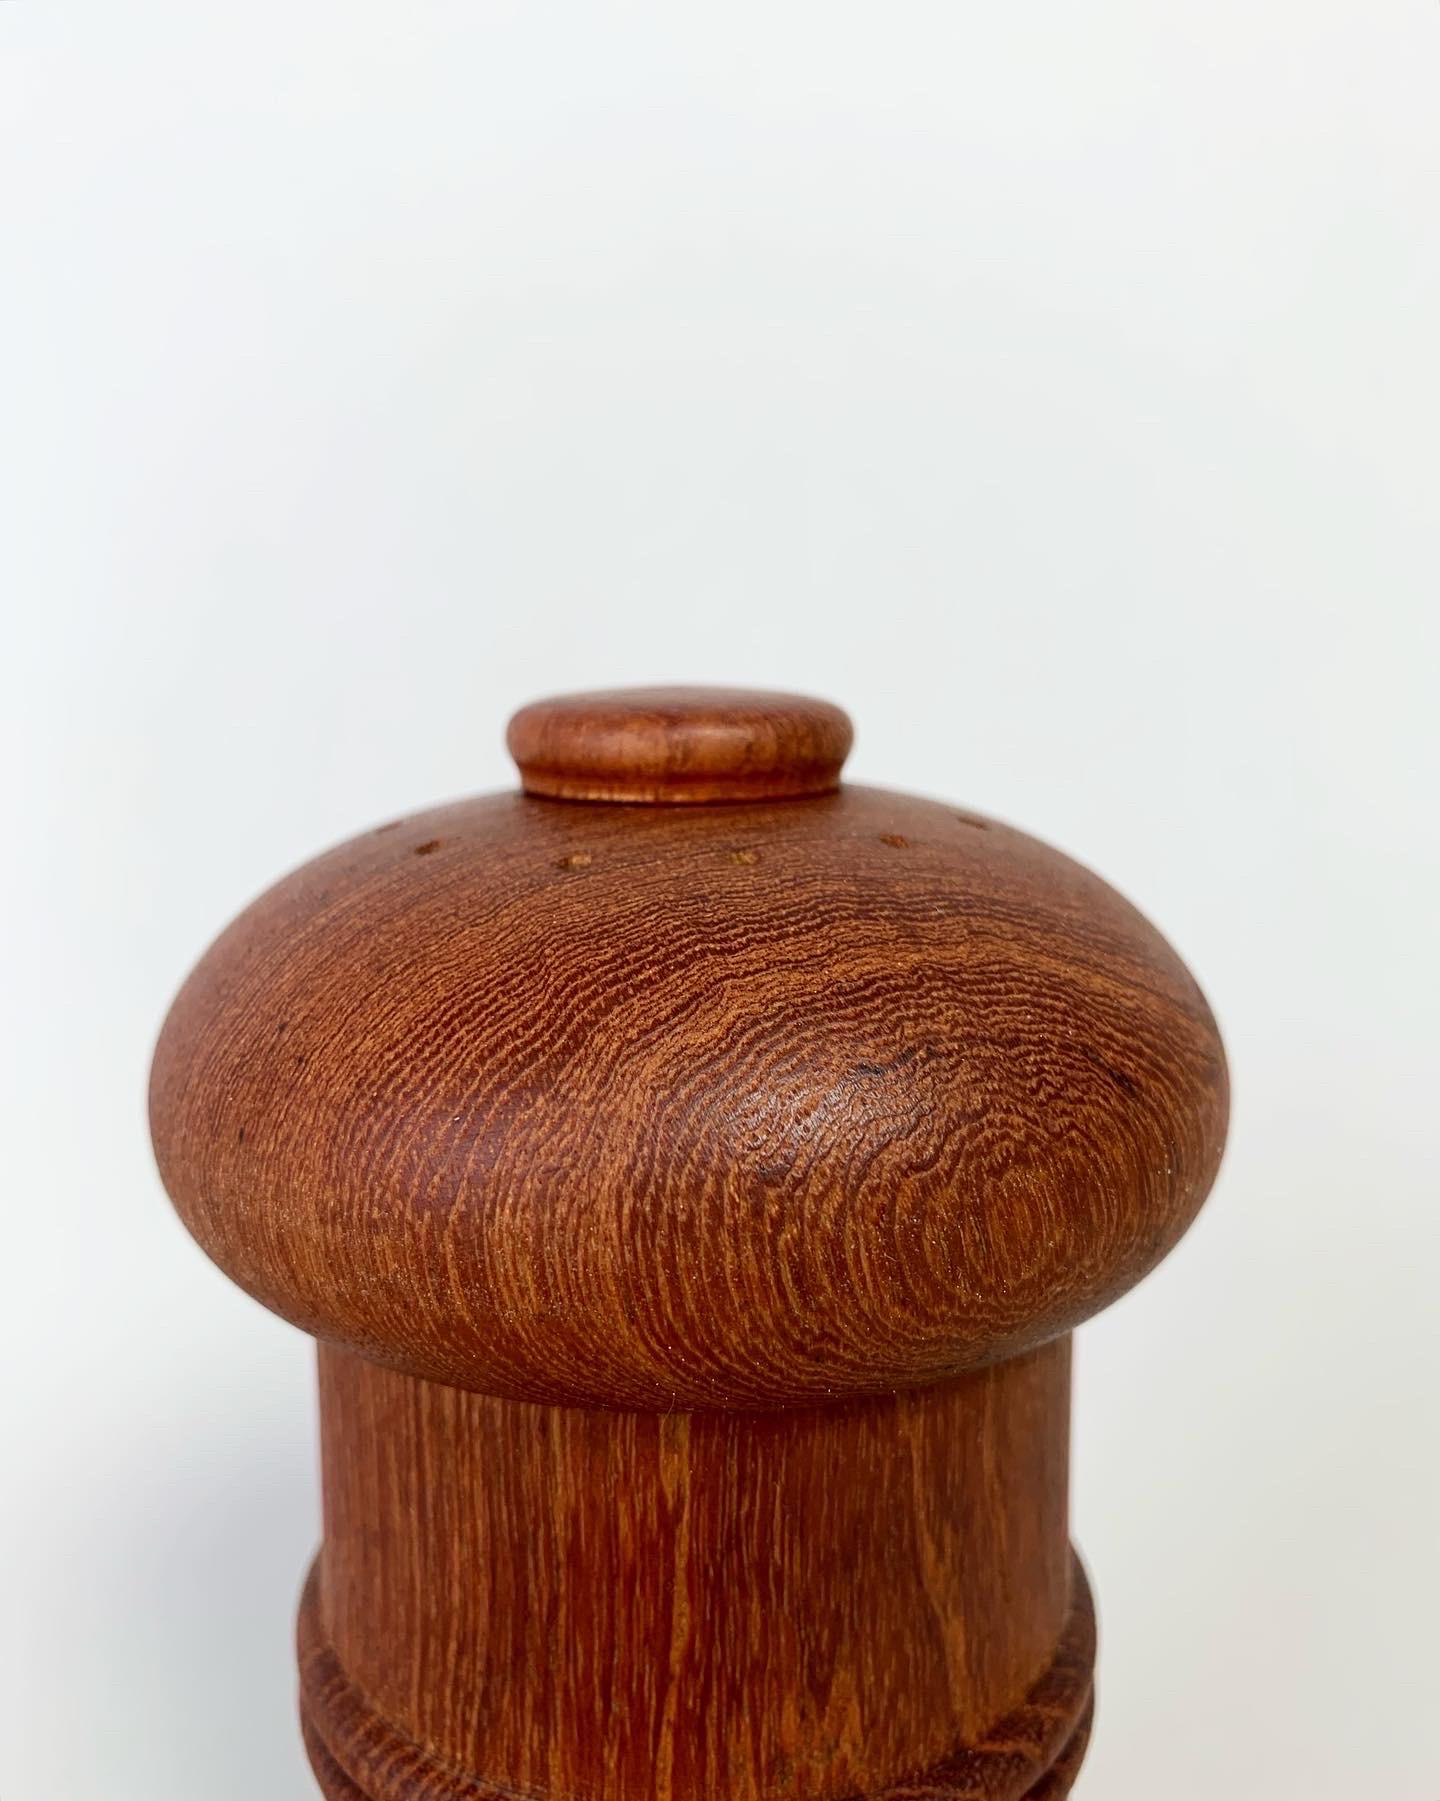 Late 20th Century Jens Harald Quistgaard Pepper Mill with Salt Shaker Two in One Dansk Design 1970